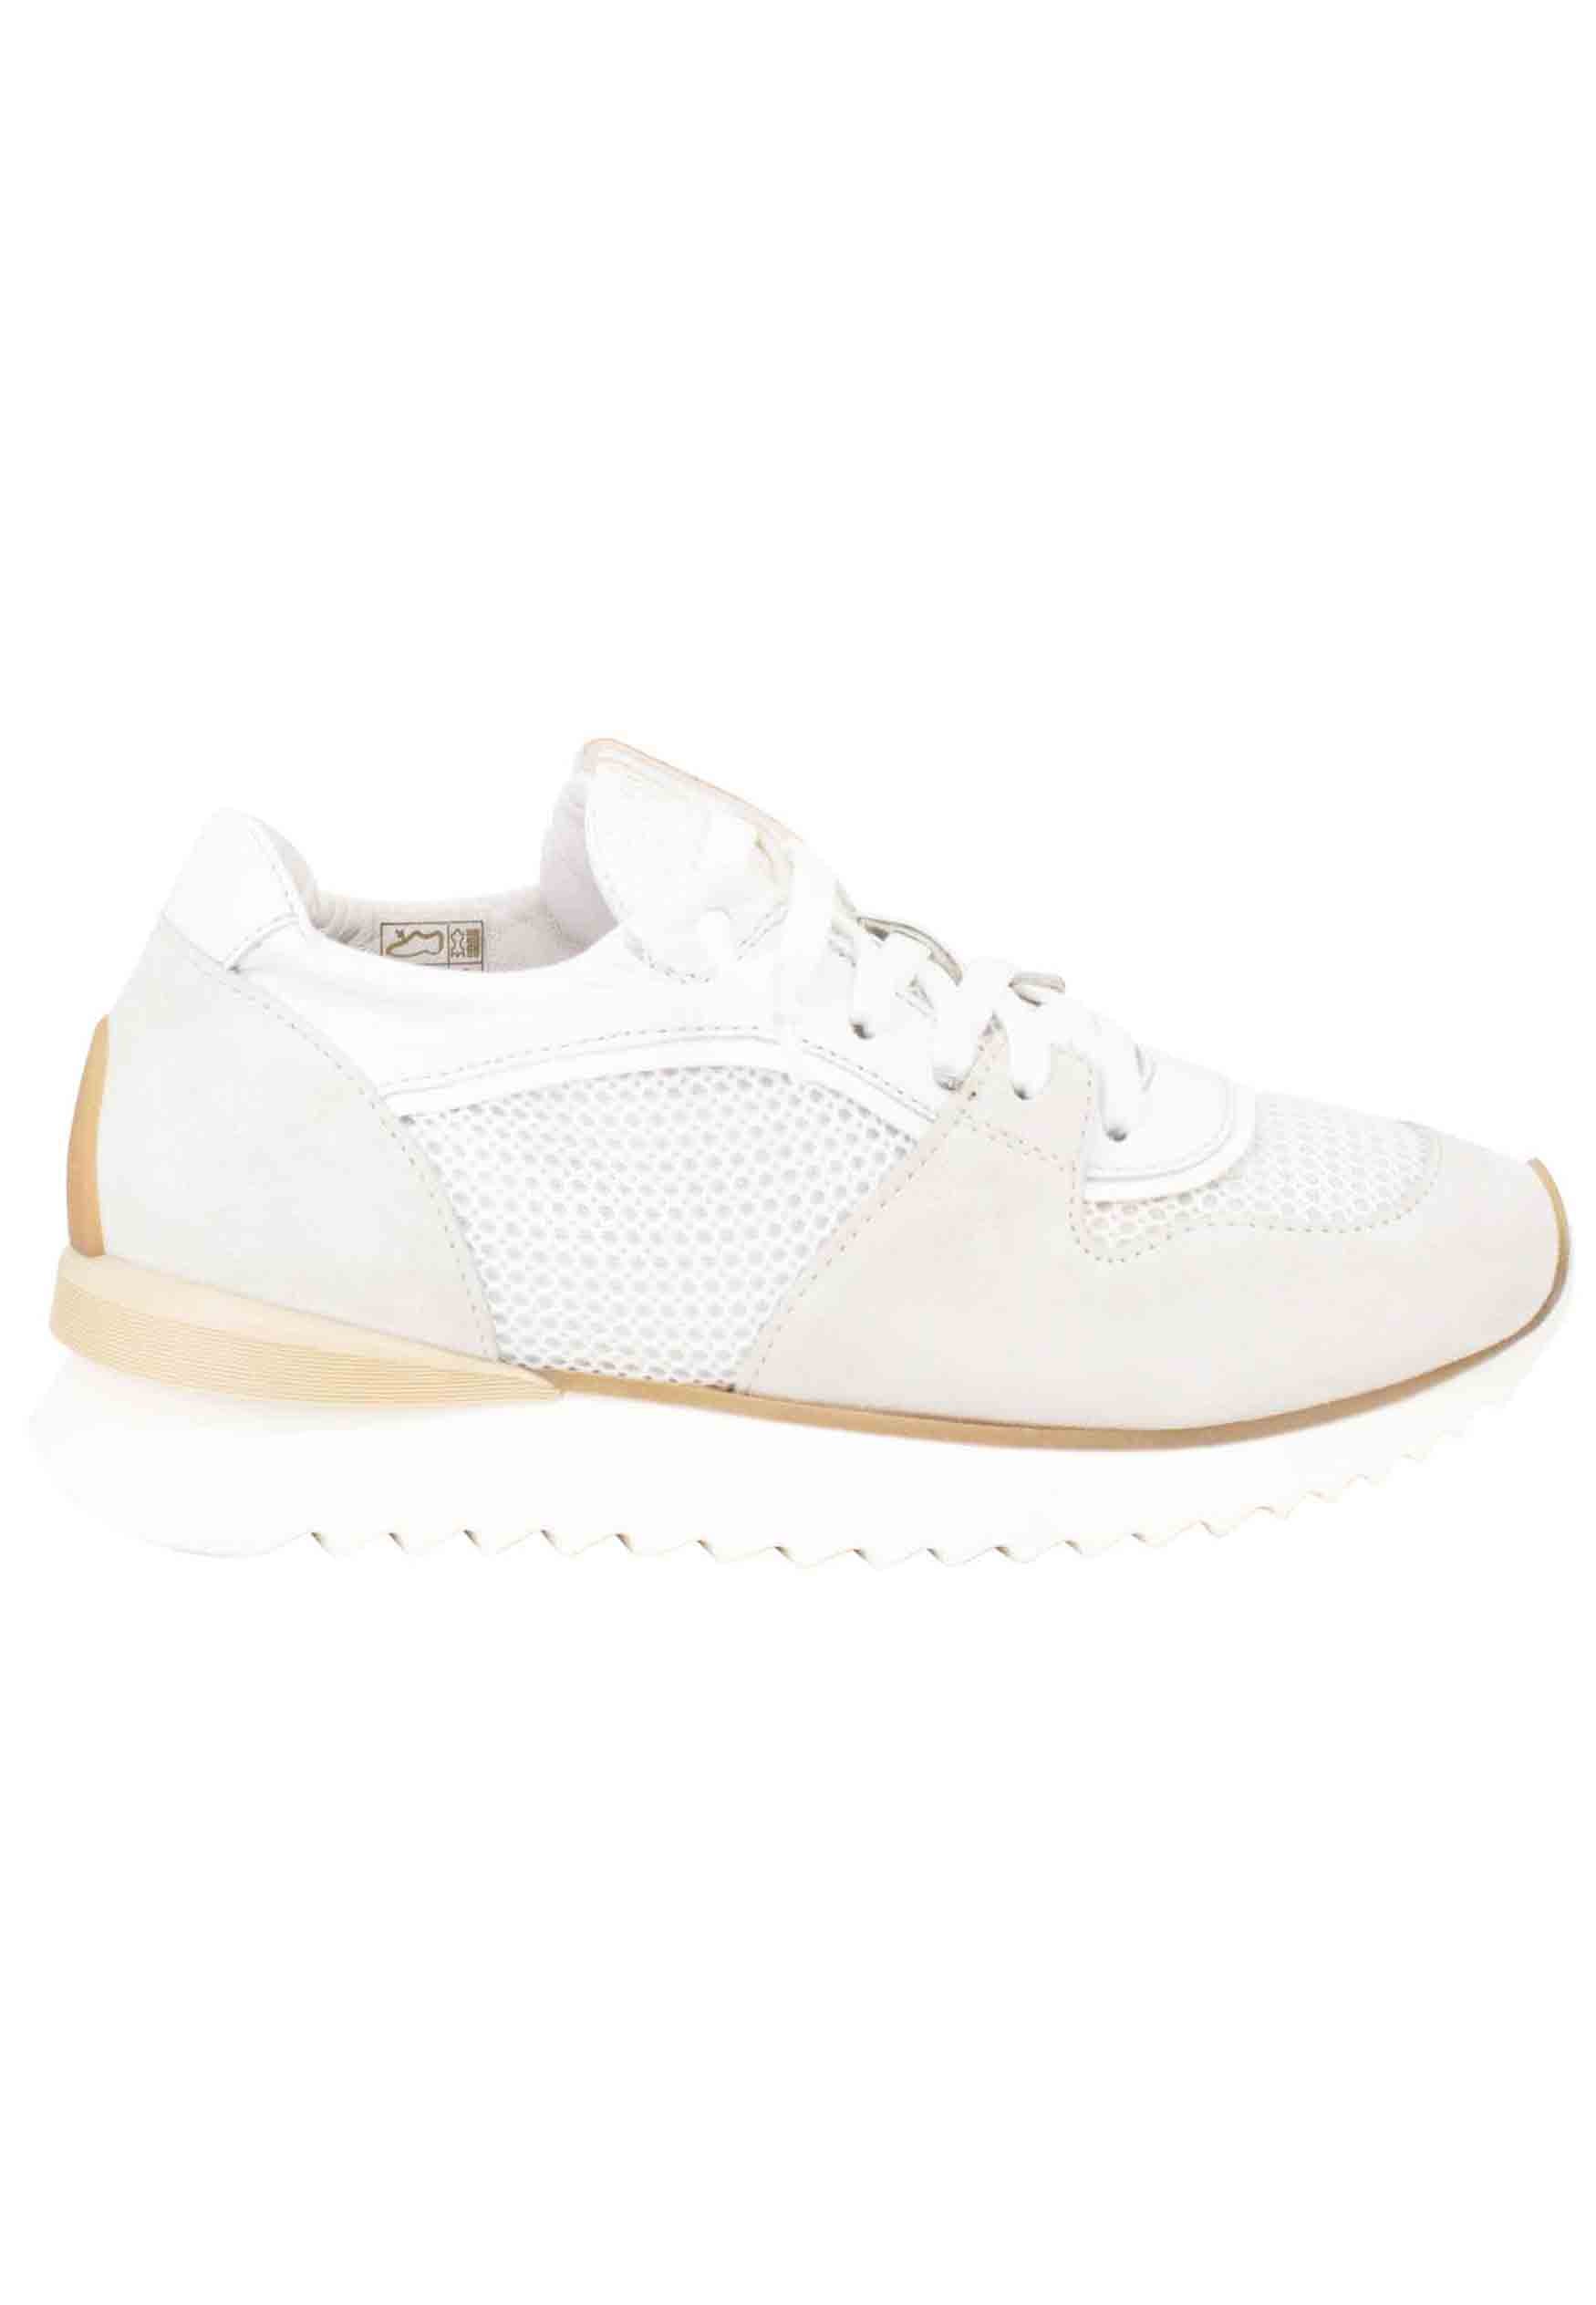 Women's sneakers in leather and white fabric with running sole